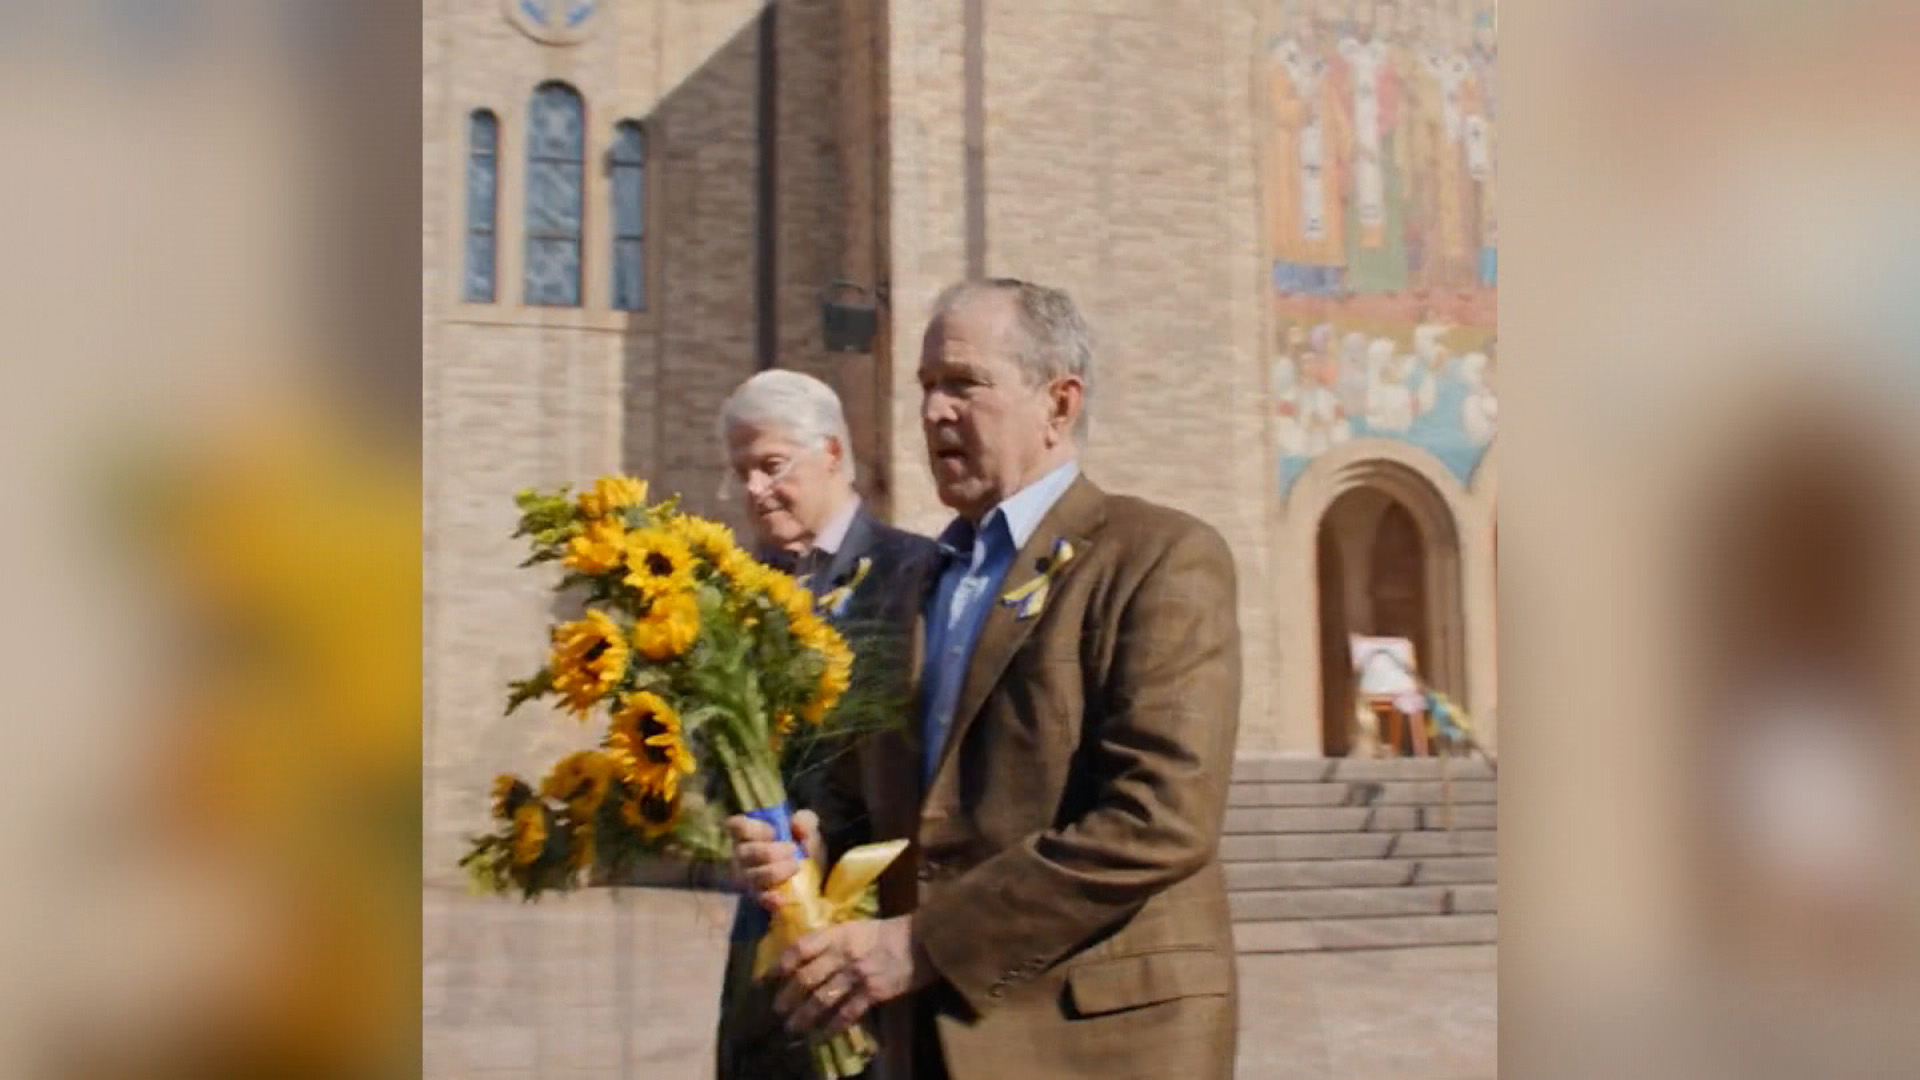 Former US Presidents George W. Bush and Bill Clinton visited the Saints Volodymyr & Olha Ukrainian Catholic Church in Chicago to “show solidarity with the people of Ukraine” on Friday March 18.